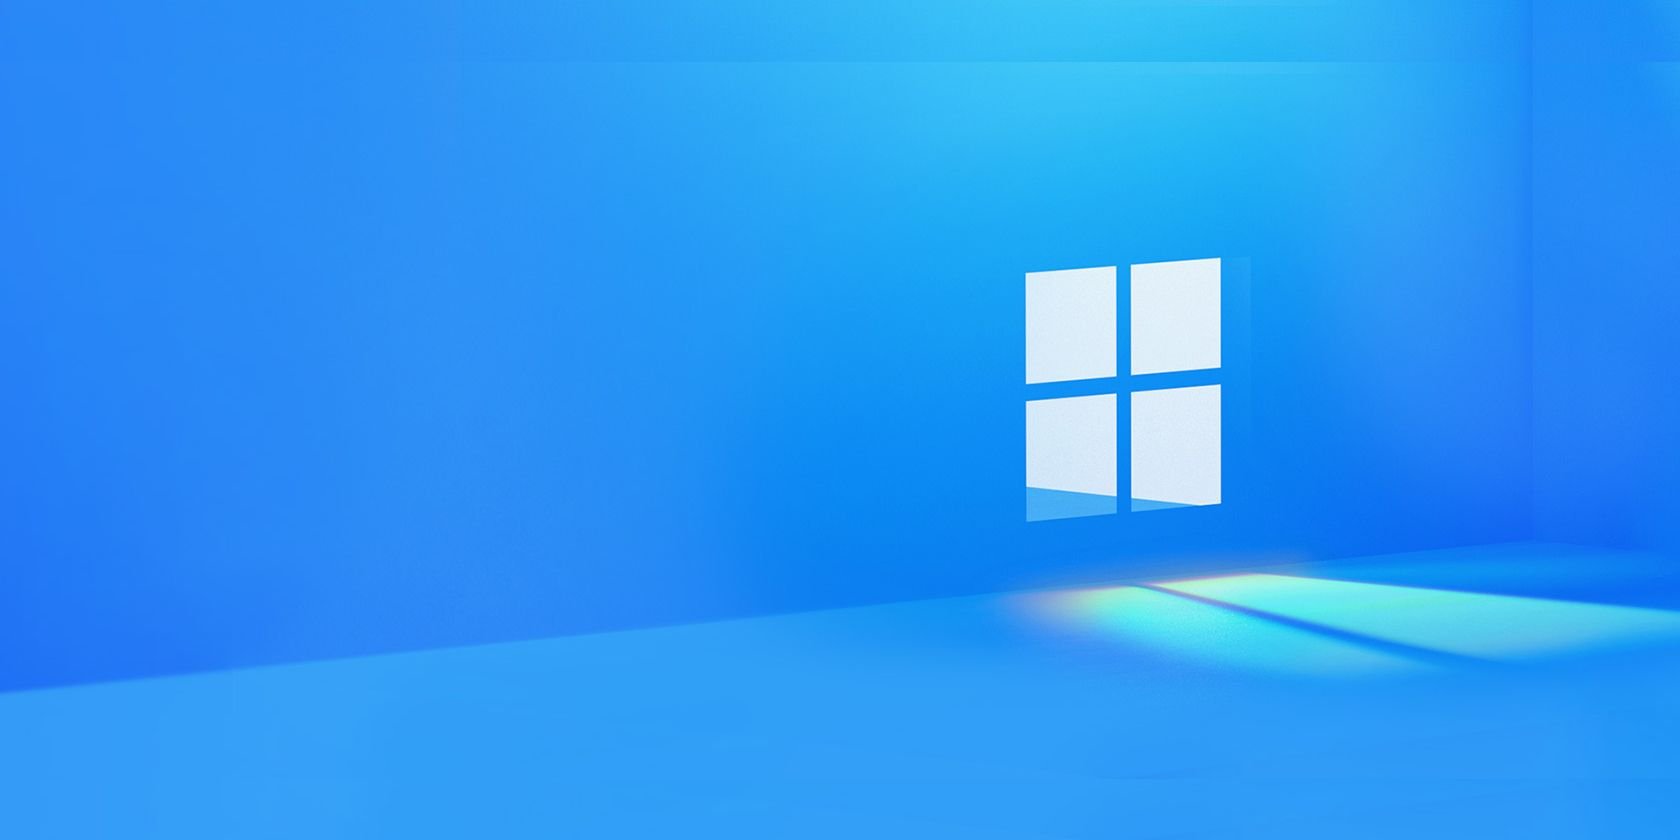 Windows 11: What Is It? When Will It Launch? Is It Even Real?